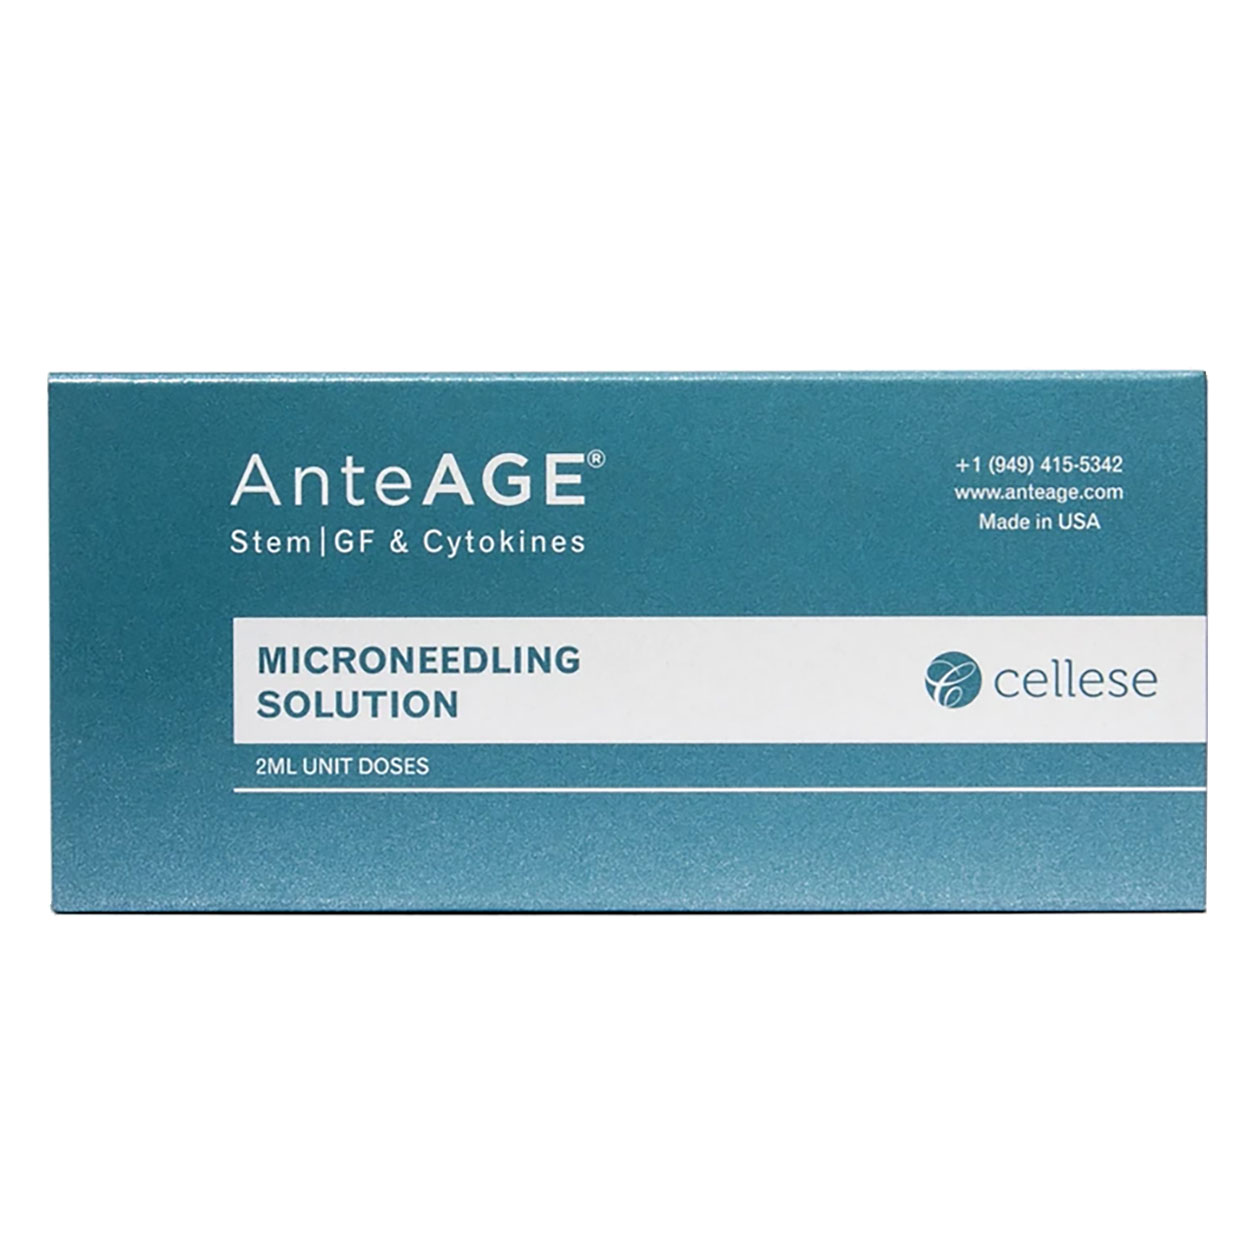 AnteAGE Microneedling Solution - 5 x 2 ml Questions & Answers